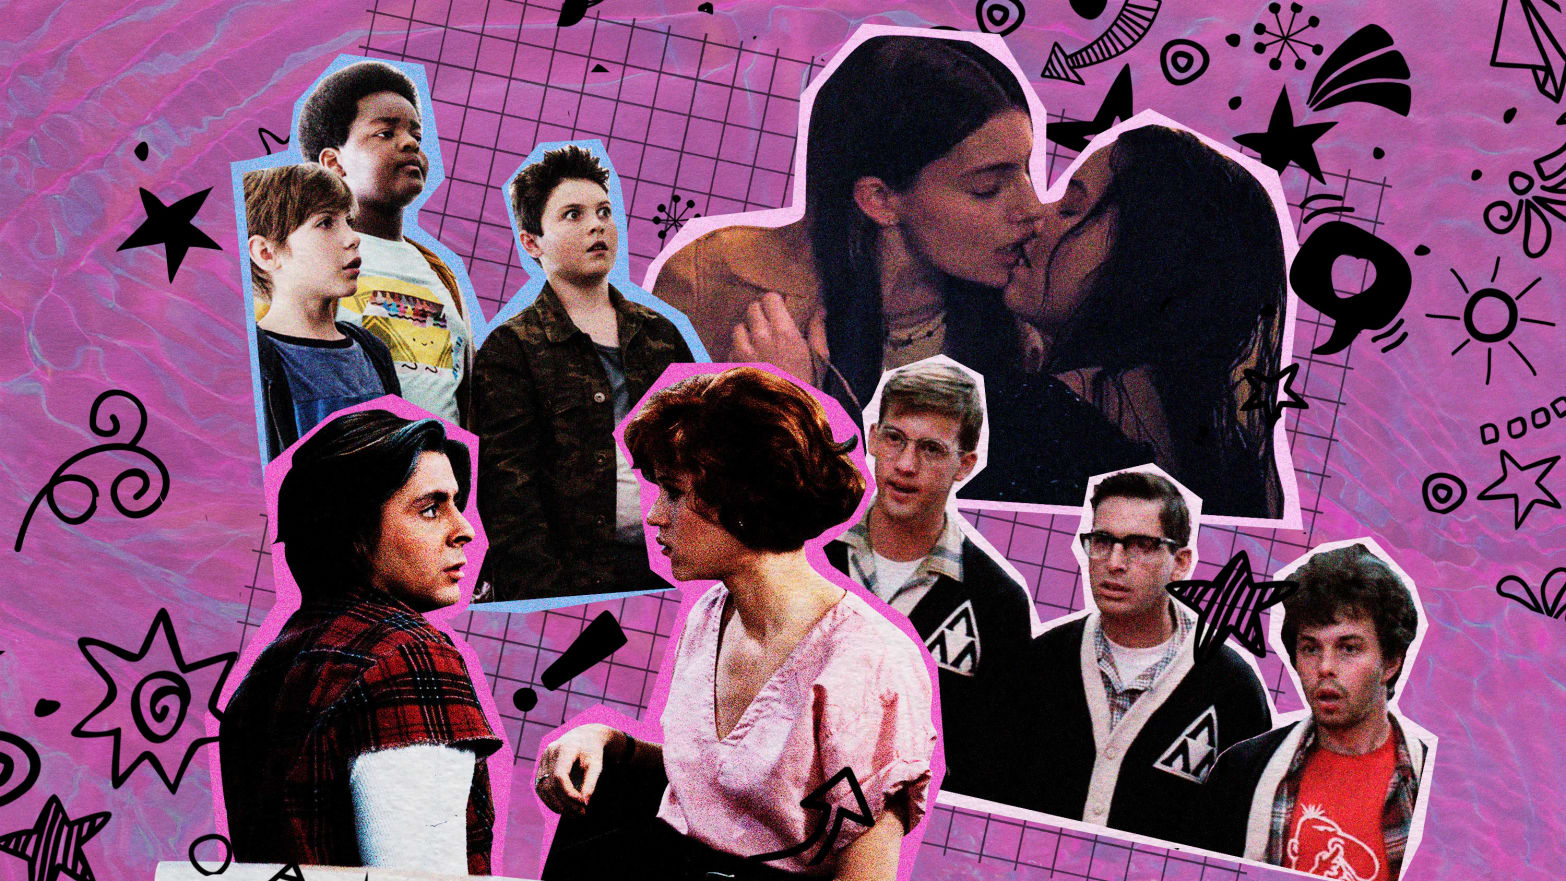 Teen Movies Still Arent Getting Sex and Consent Right, Says Michelle Meek pic